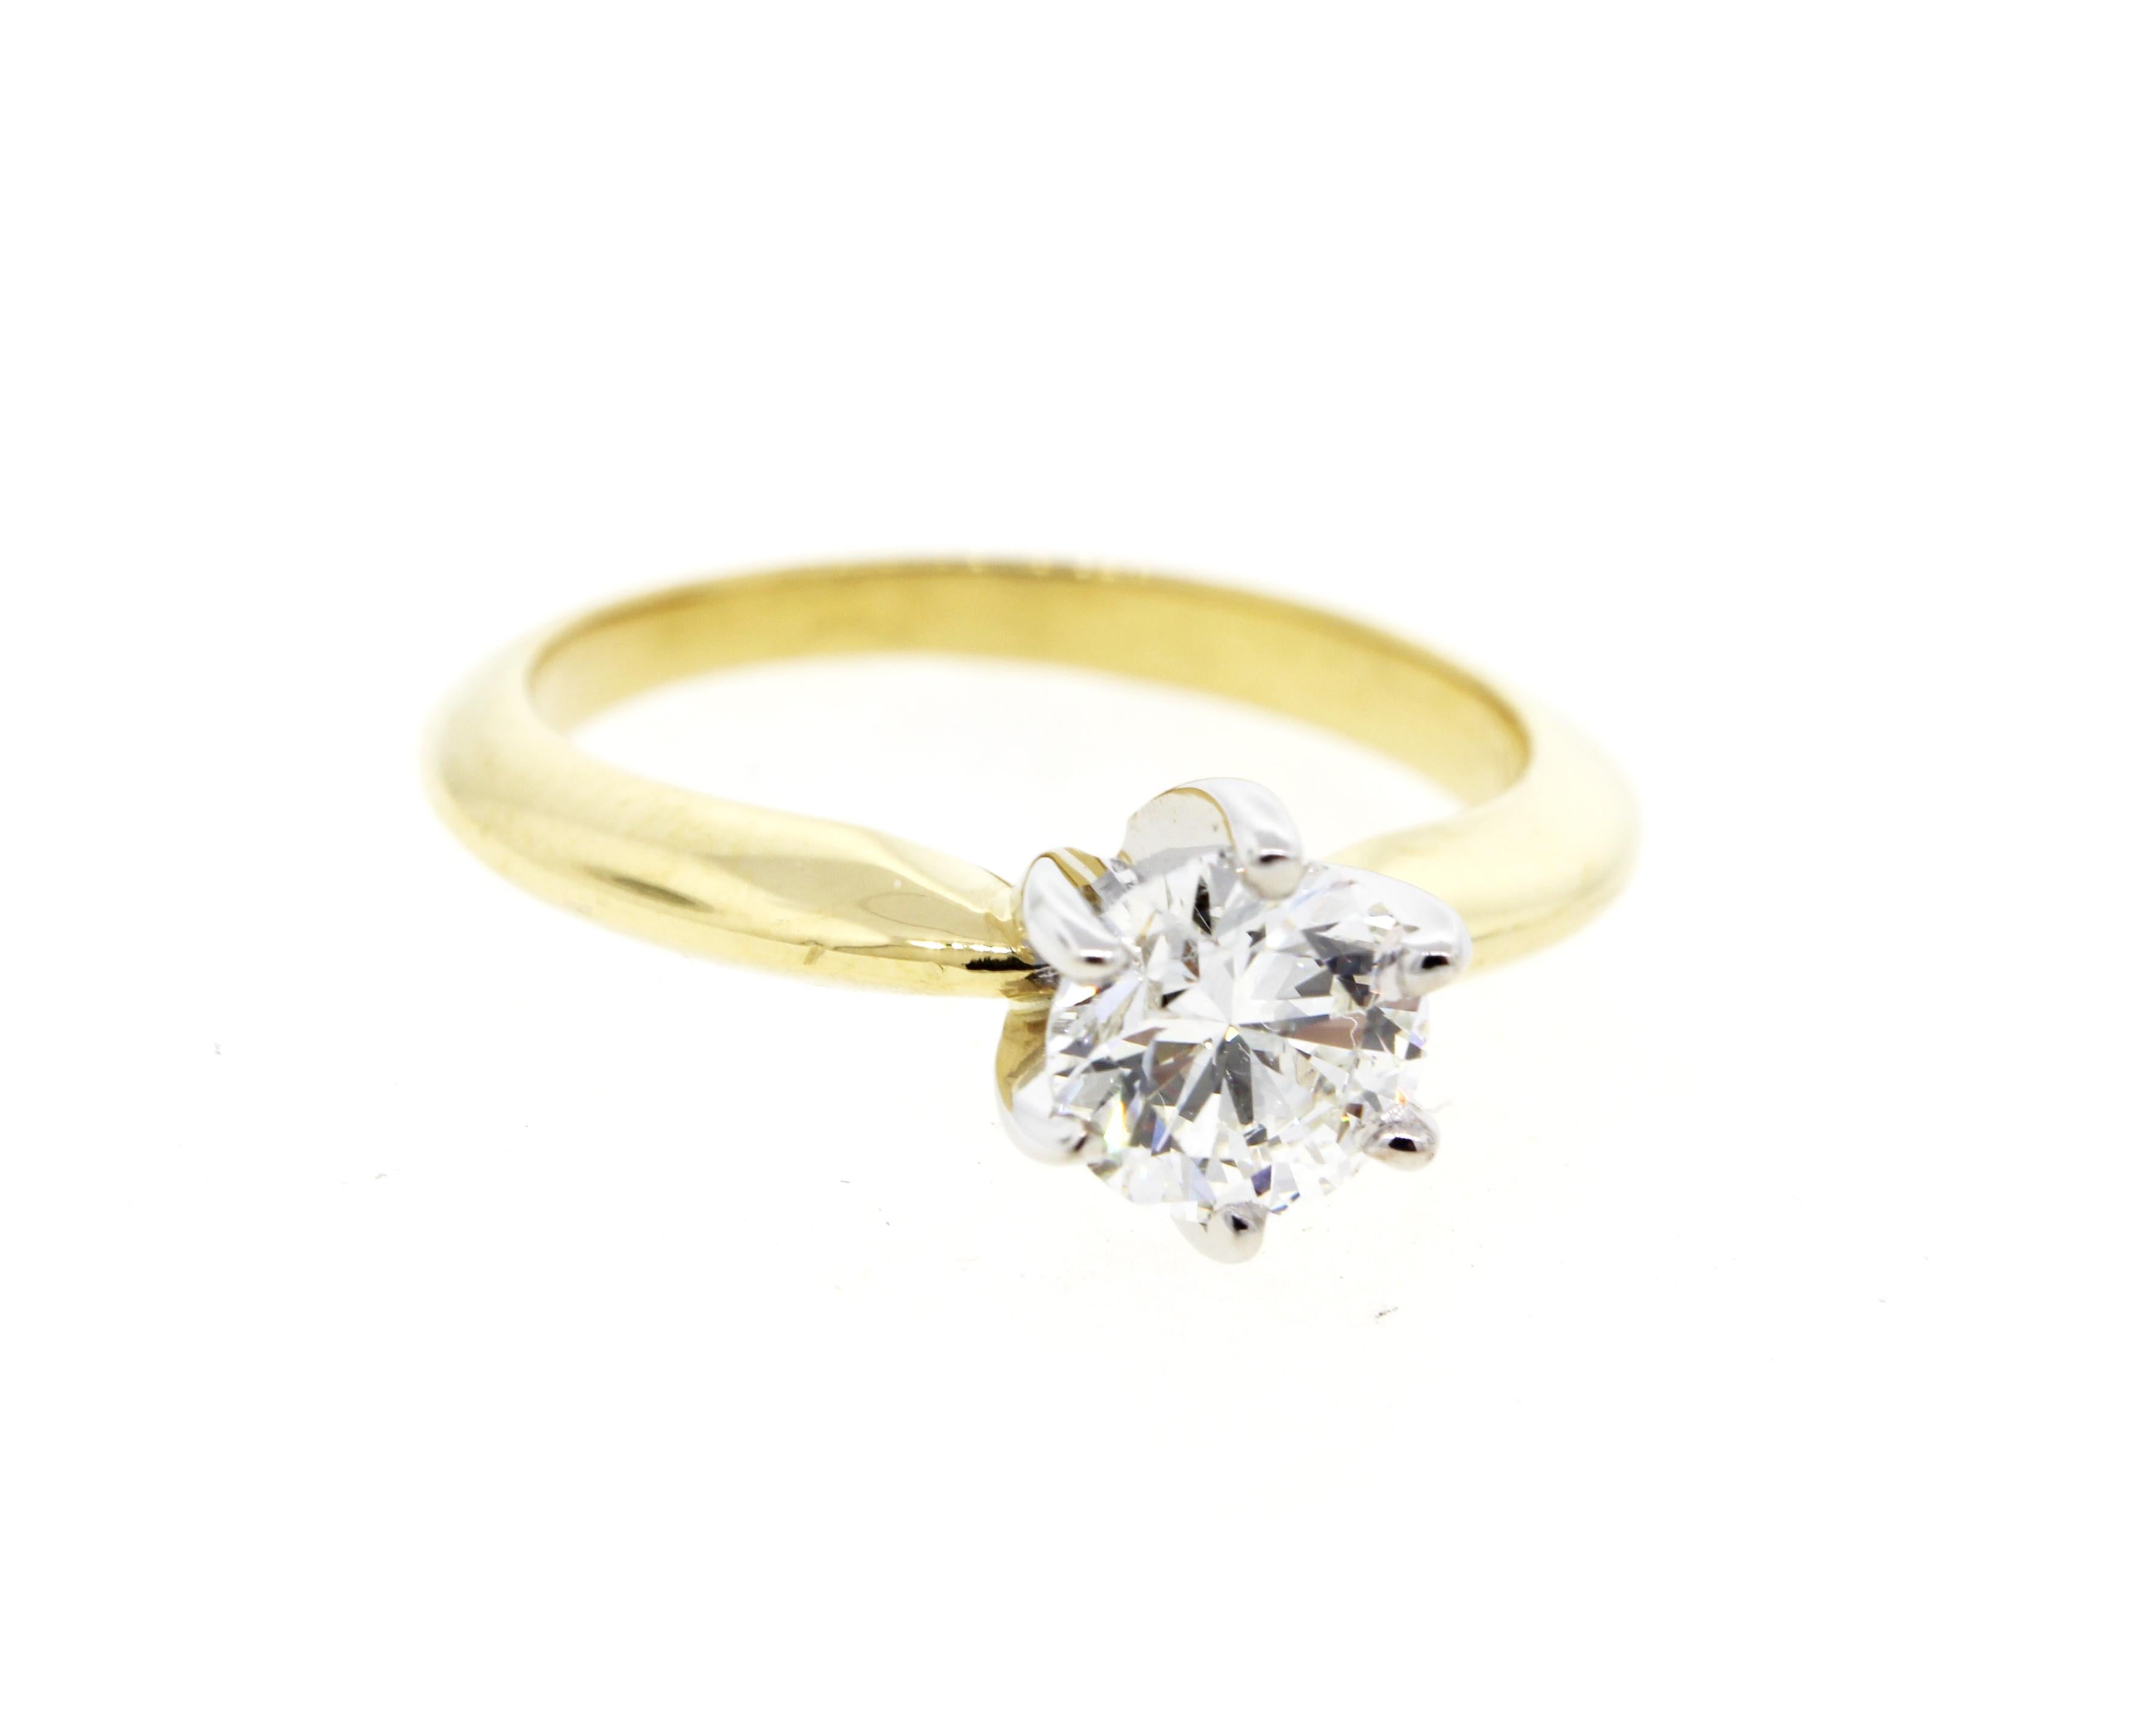 Elegant and classic, this beautiful setting features a surprise two-tone look with a white gold basket. This ring is one of our most popular and most requested rings for good reason! It’s a classic look that combines a two tone yellow gold and white